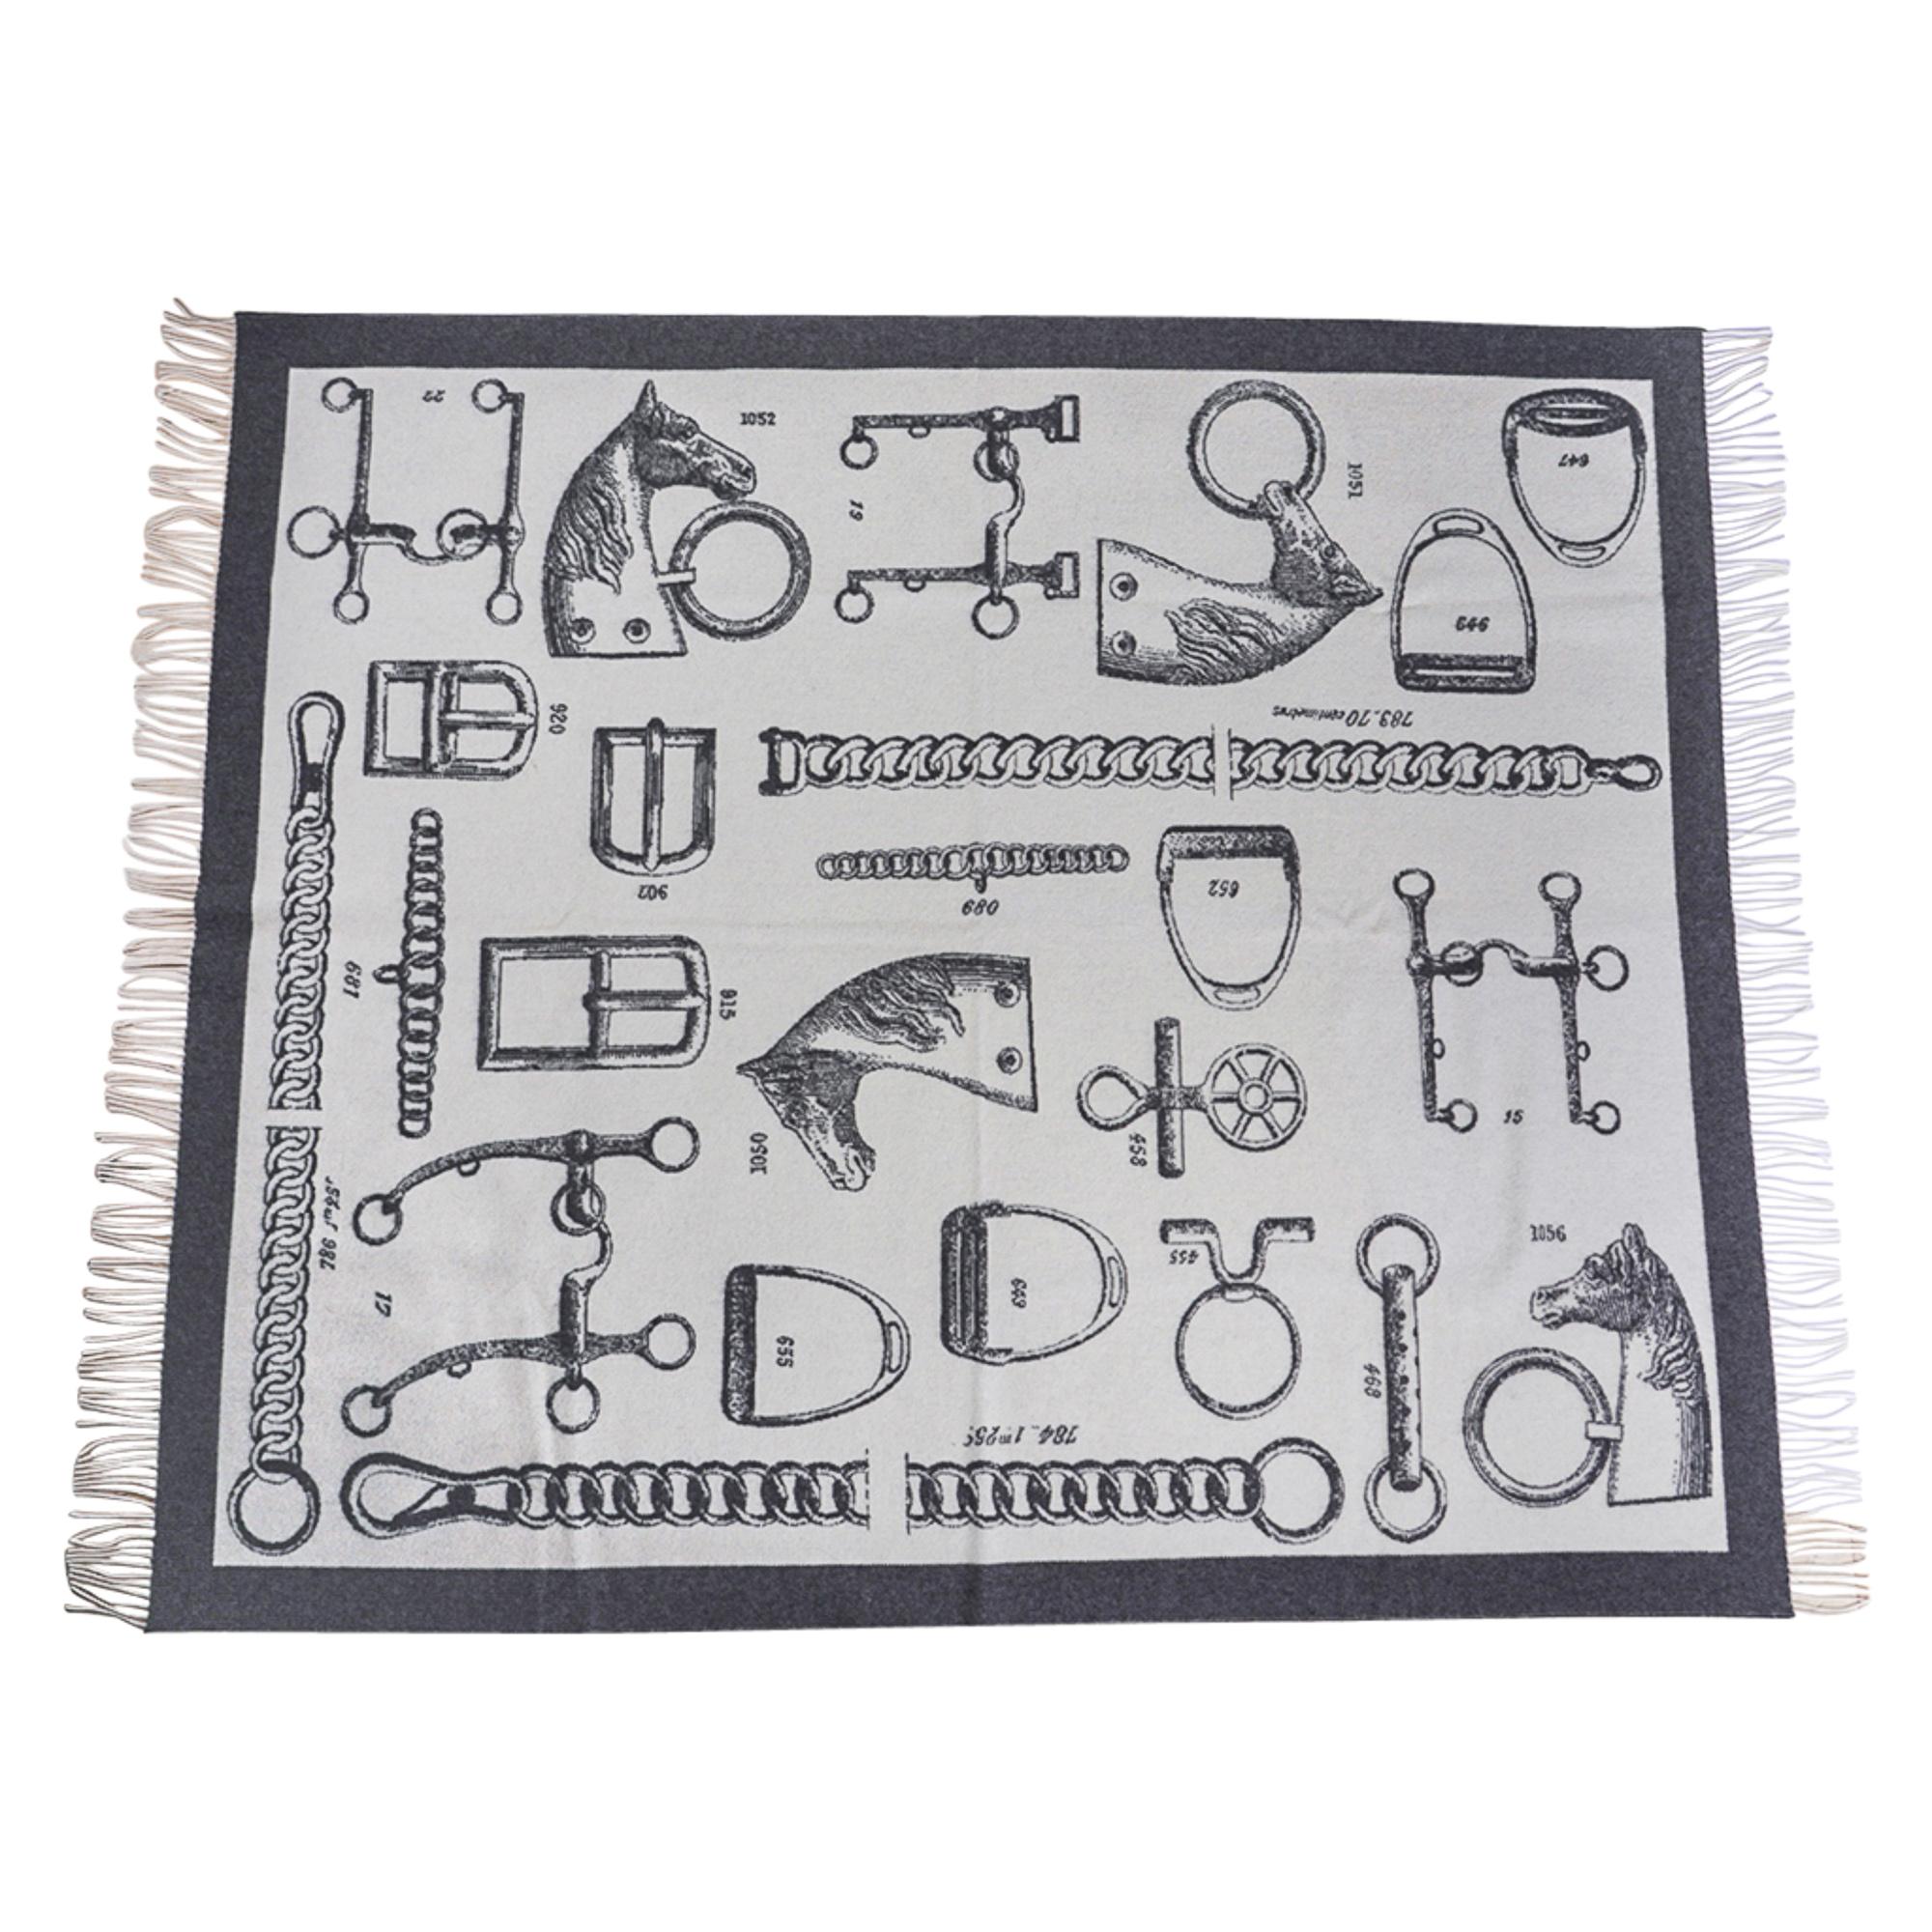 Guaranteed authentic Hermes limited edition Metalleries reversible blanket featured in Gris and Ecru.
Detailed equestrian objects adorn the fringed edged Hermes Blanket.
Created from 72% Cashmere and 90% Wool this wonderfully warm blanket is a chic